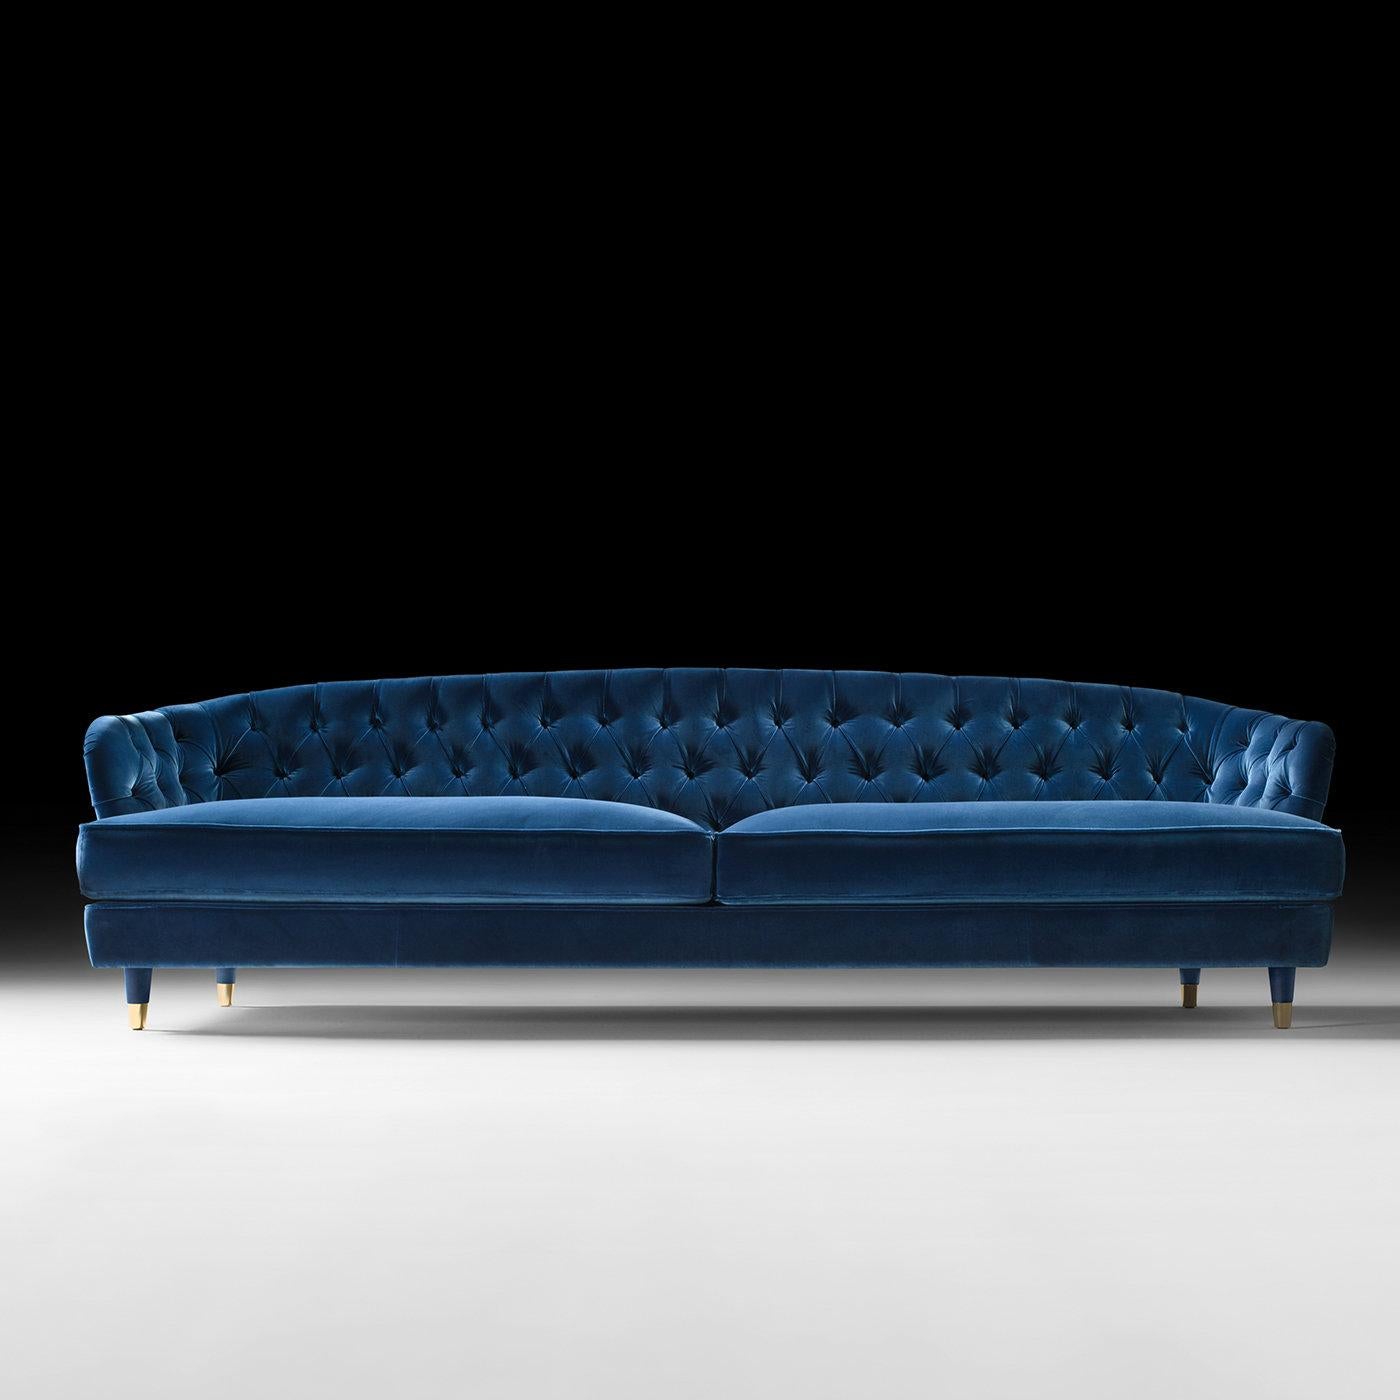 This superb sofa boasts a gleaming and strong personality in its intense blue color and soft velvet upholstery. The structure is made of solid wood and boasts an elastic belt spring system. The padding is divided in two separate levels for a higher